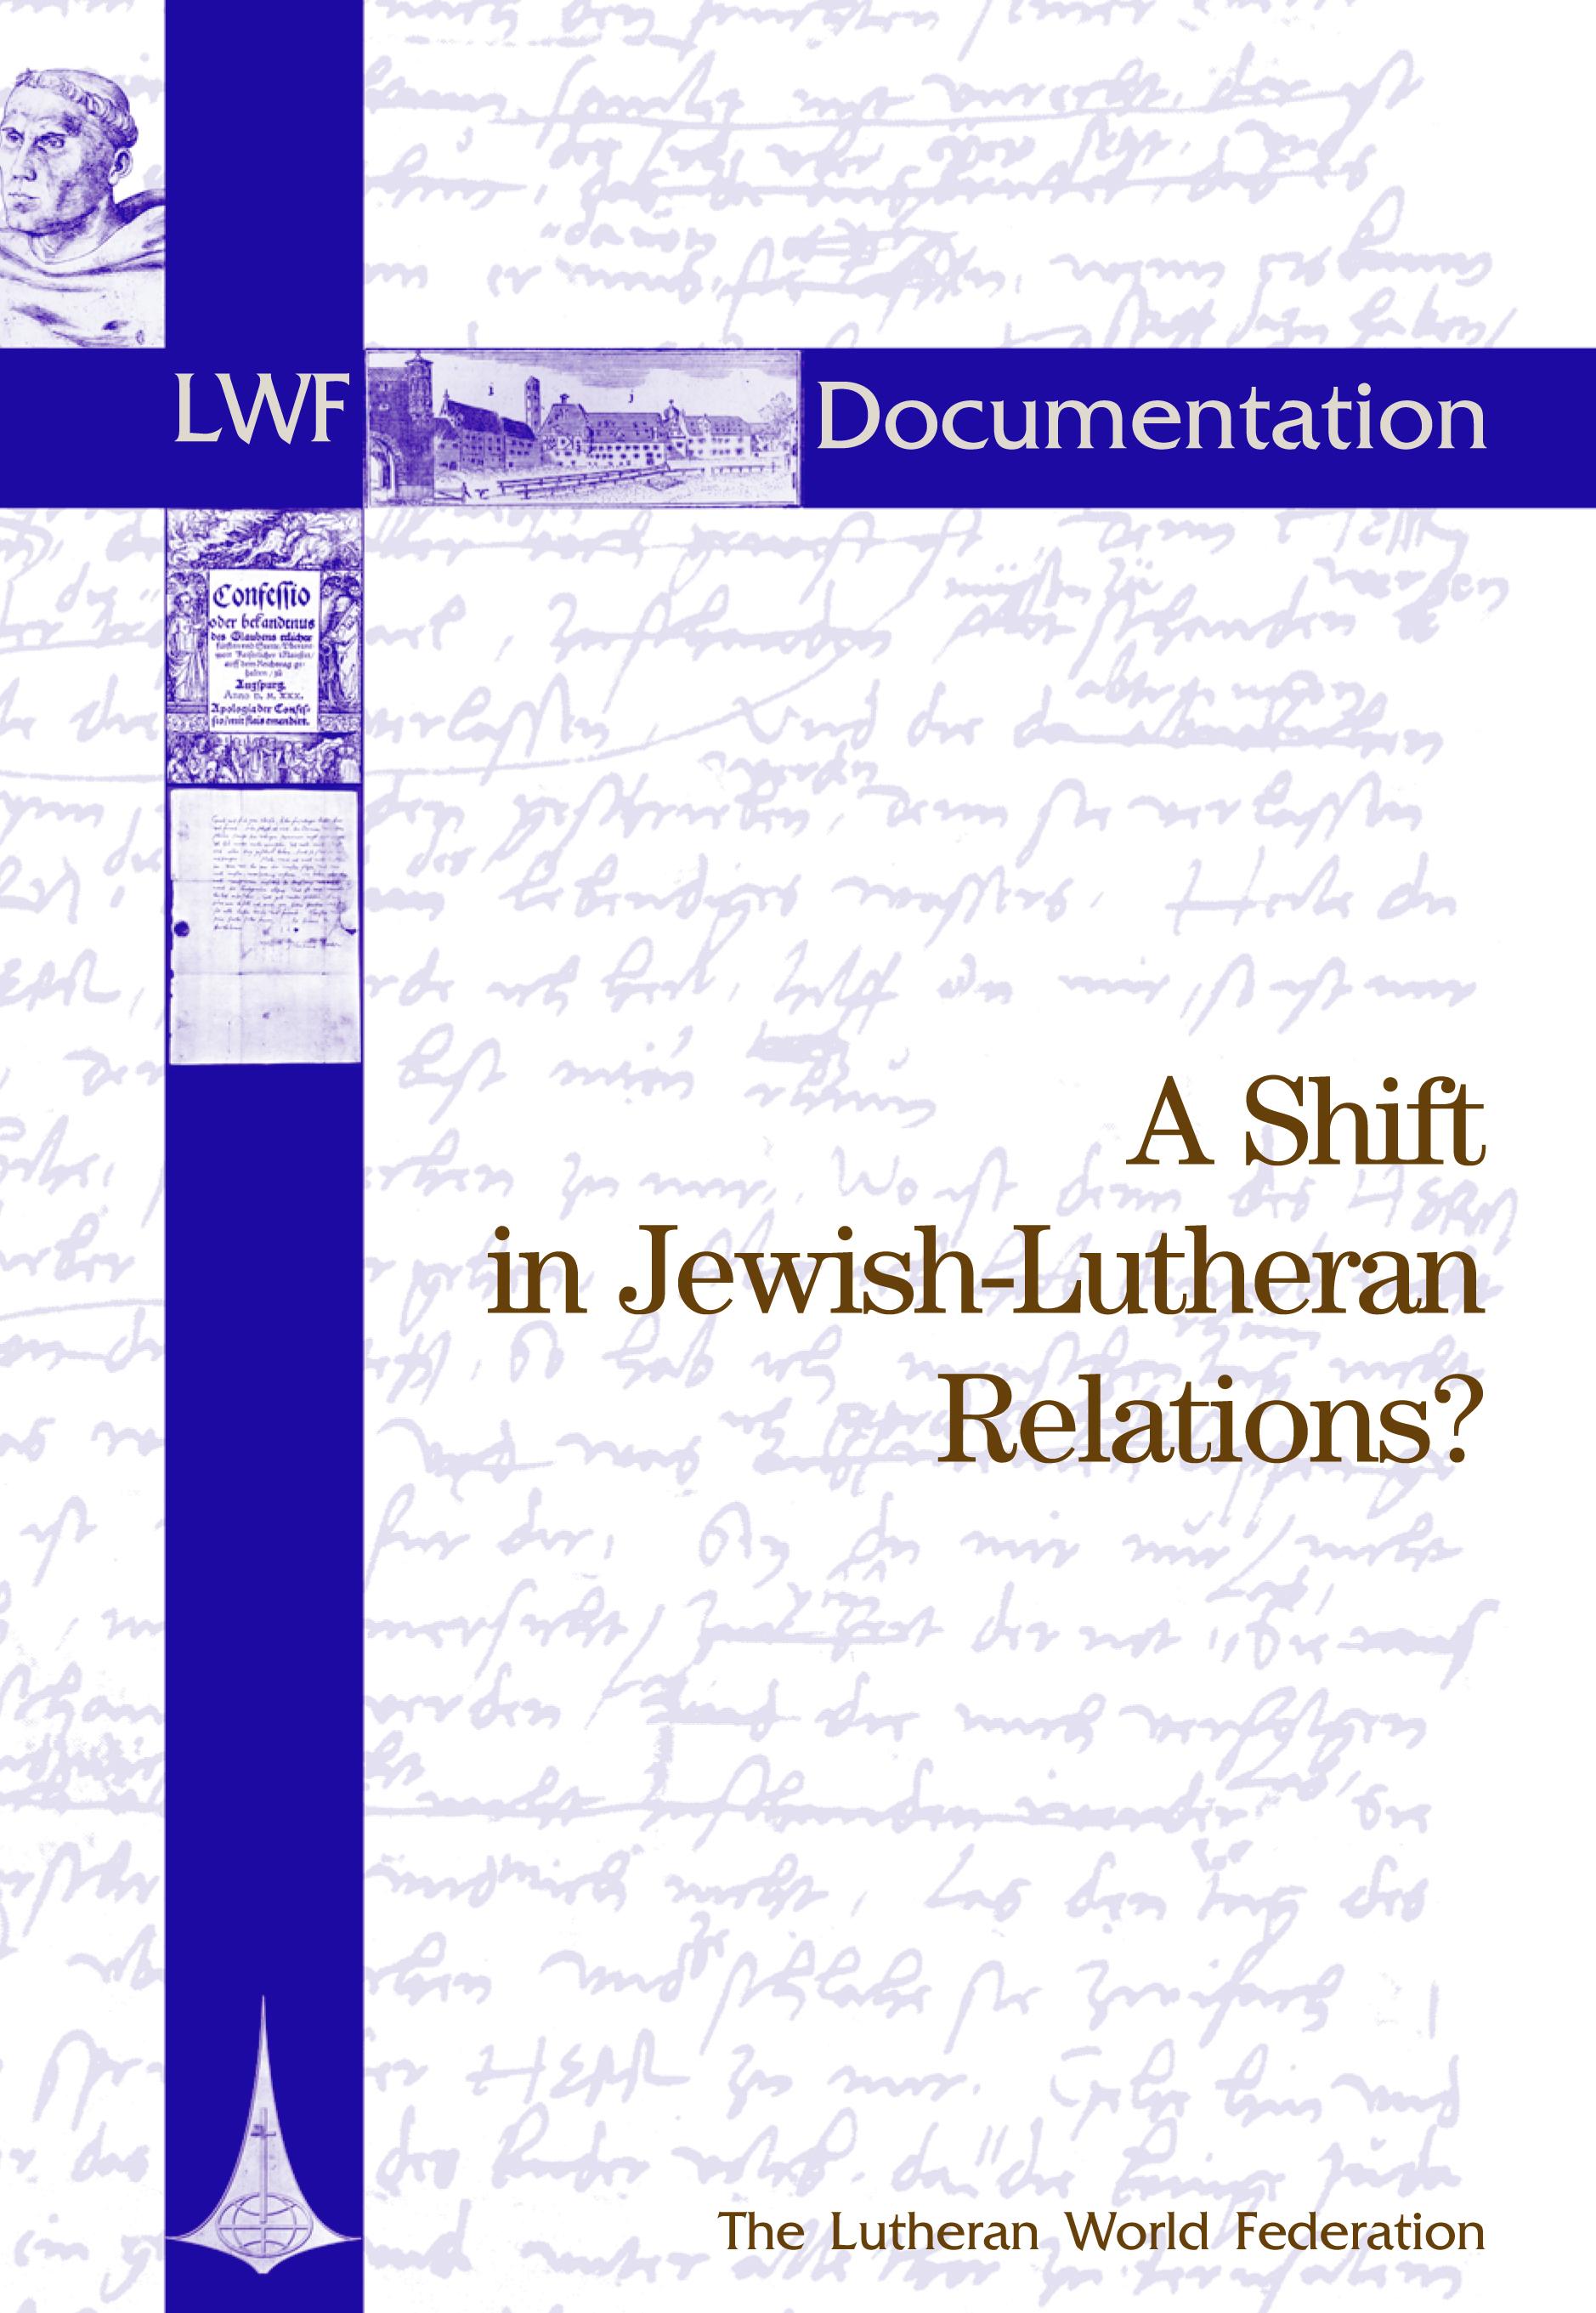 A Shift in Jewish-Lutheran Relations? (Documentation 48)